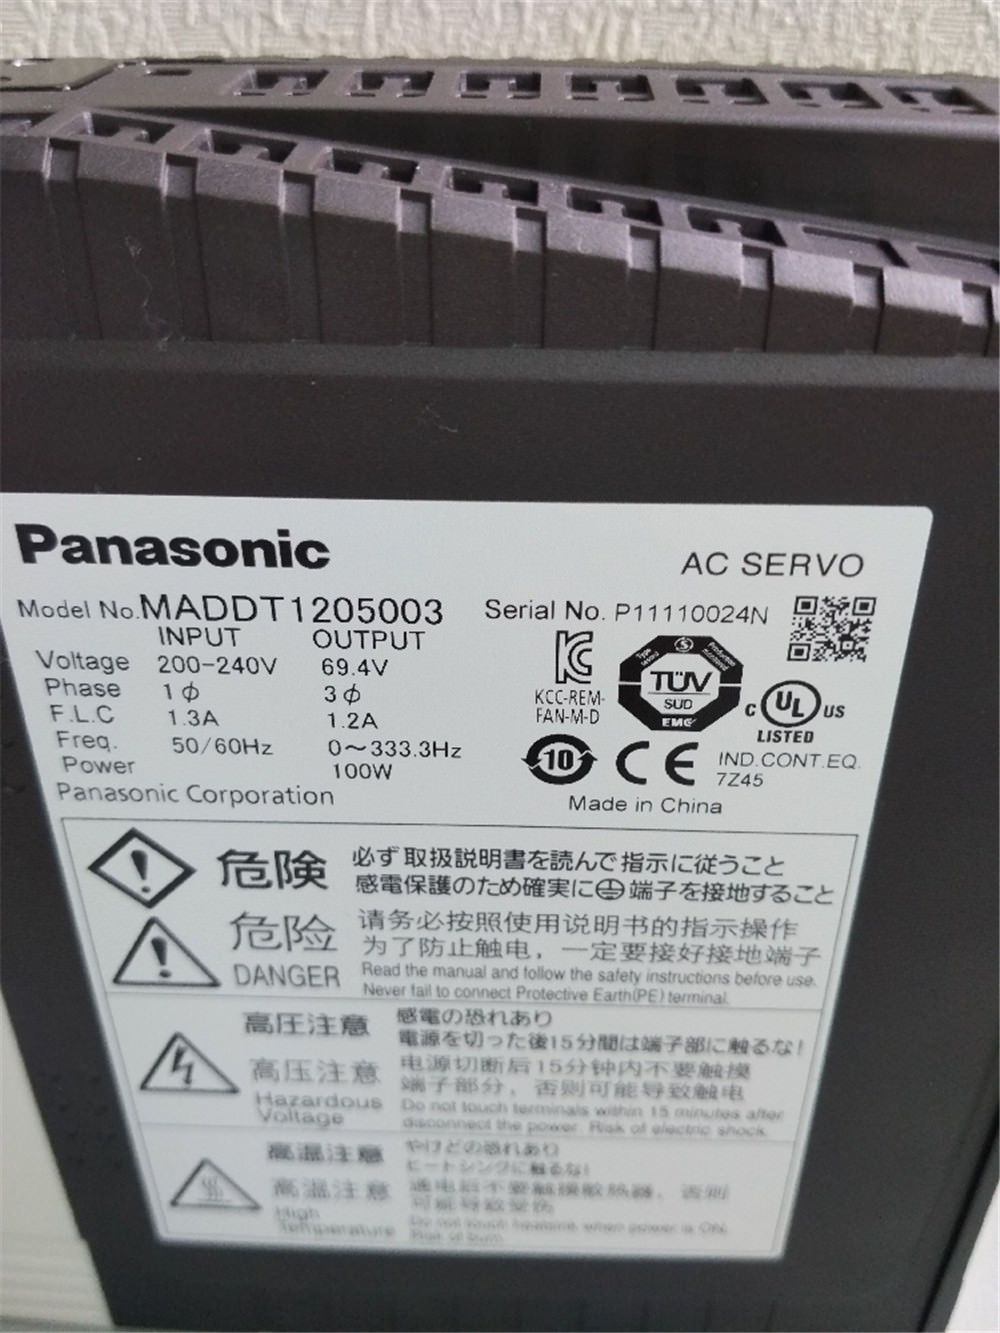 Brand New Panasonic MADDT1205003 100W 200-240V in box (not Refurbished) - Click Image to Close